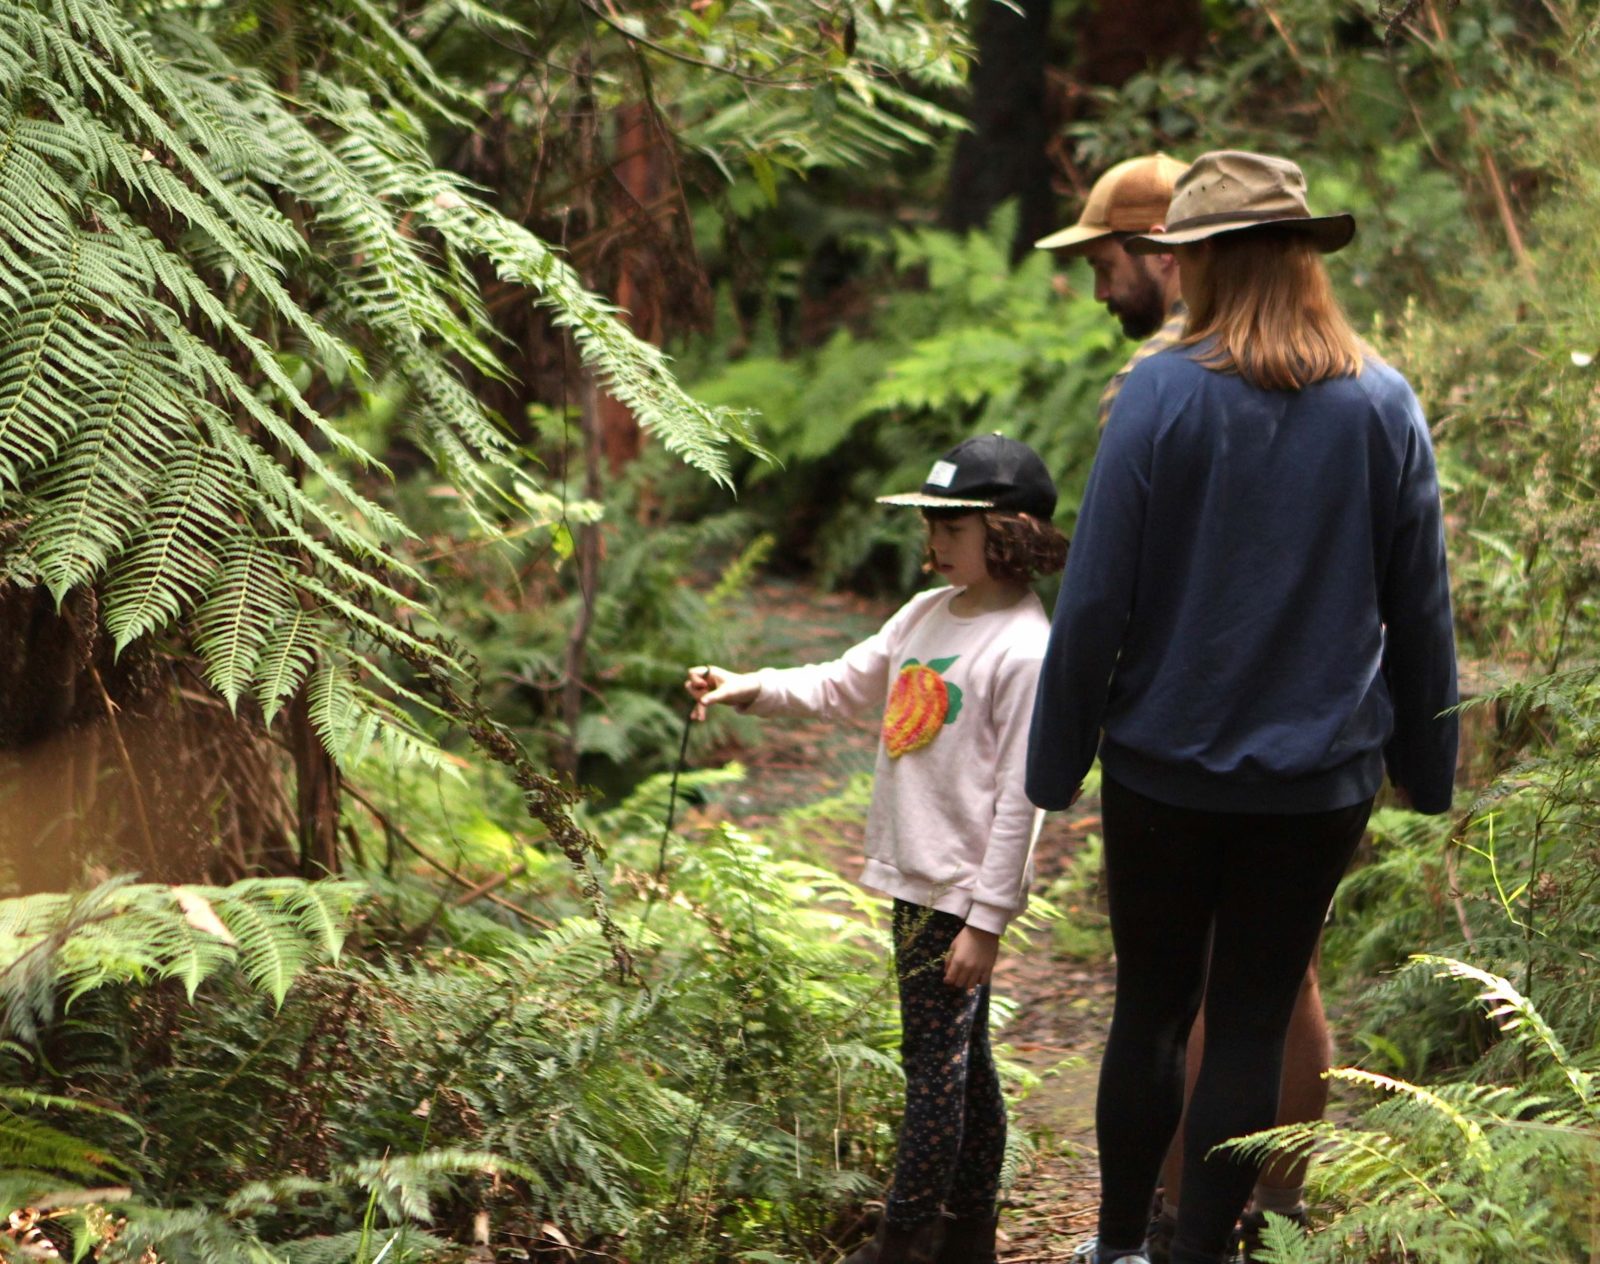 Learning about different types of ferns at the Kinglake National Park